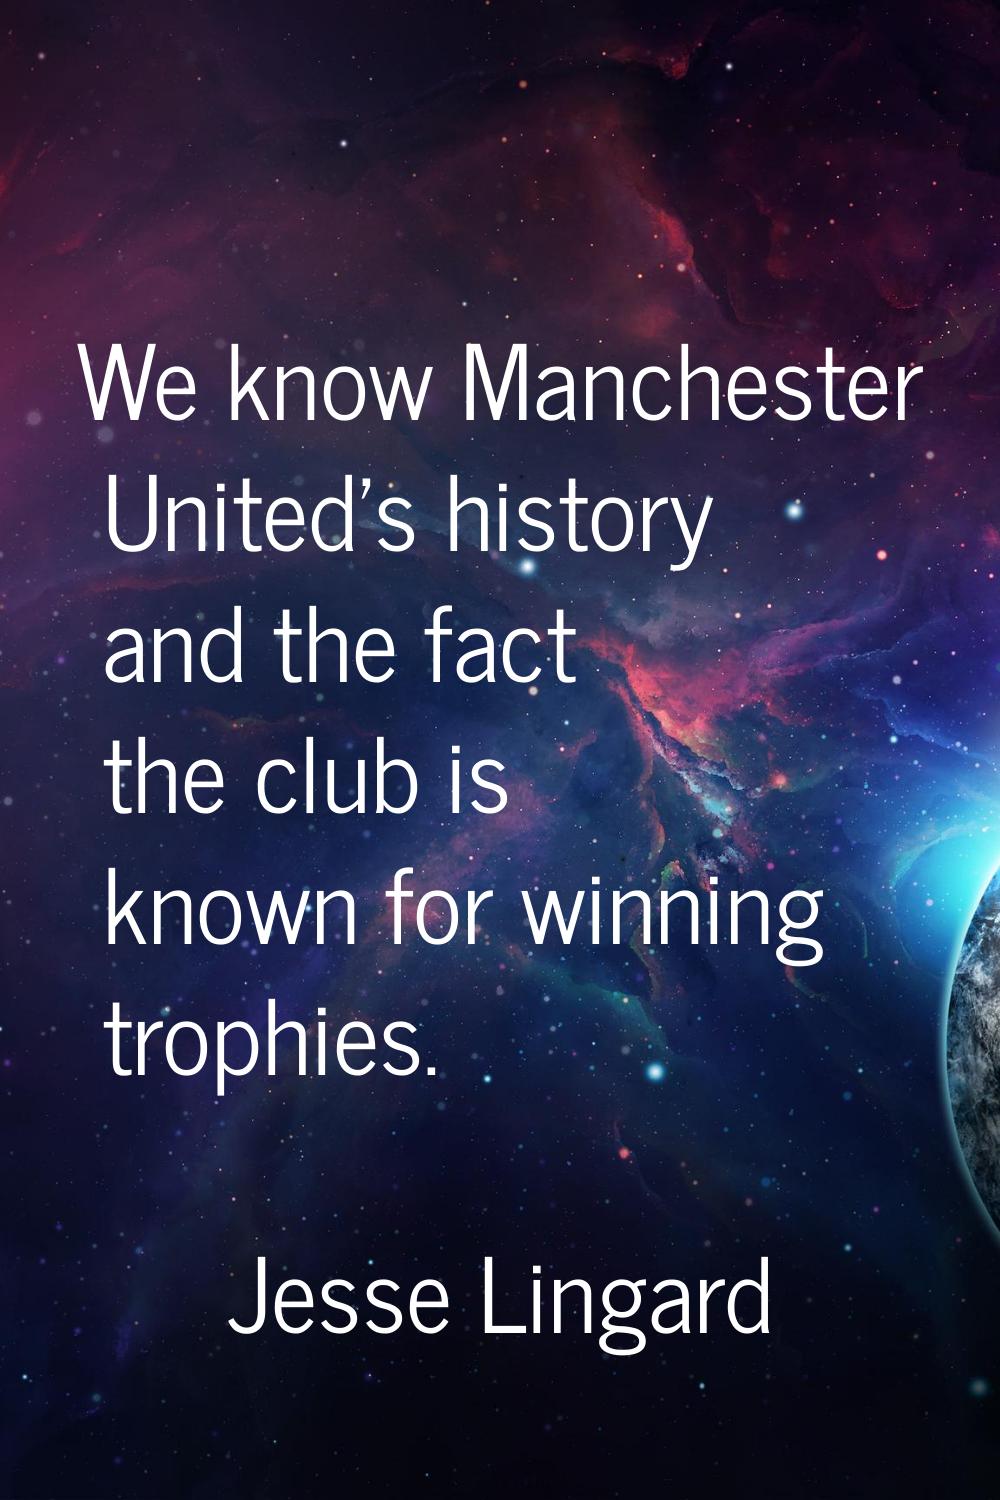 We know Manchester United's history and the fact the club is known for winning trophies.